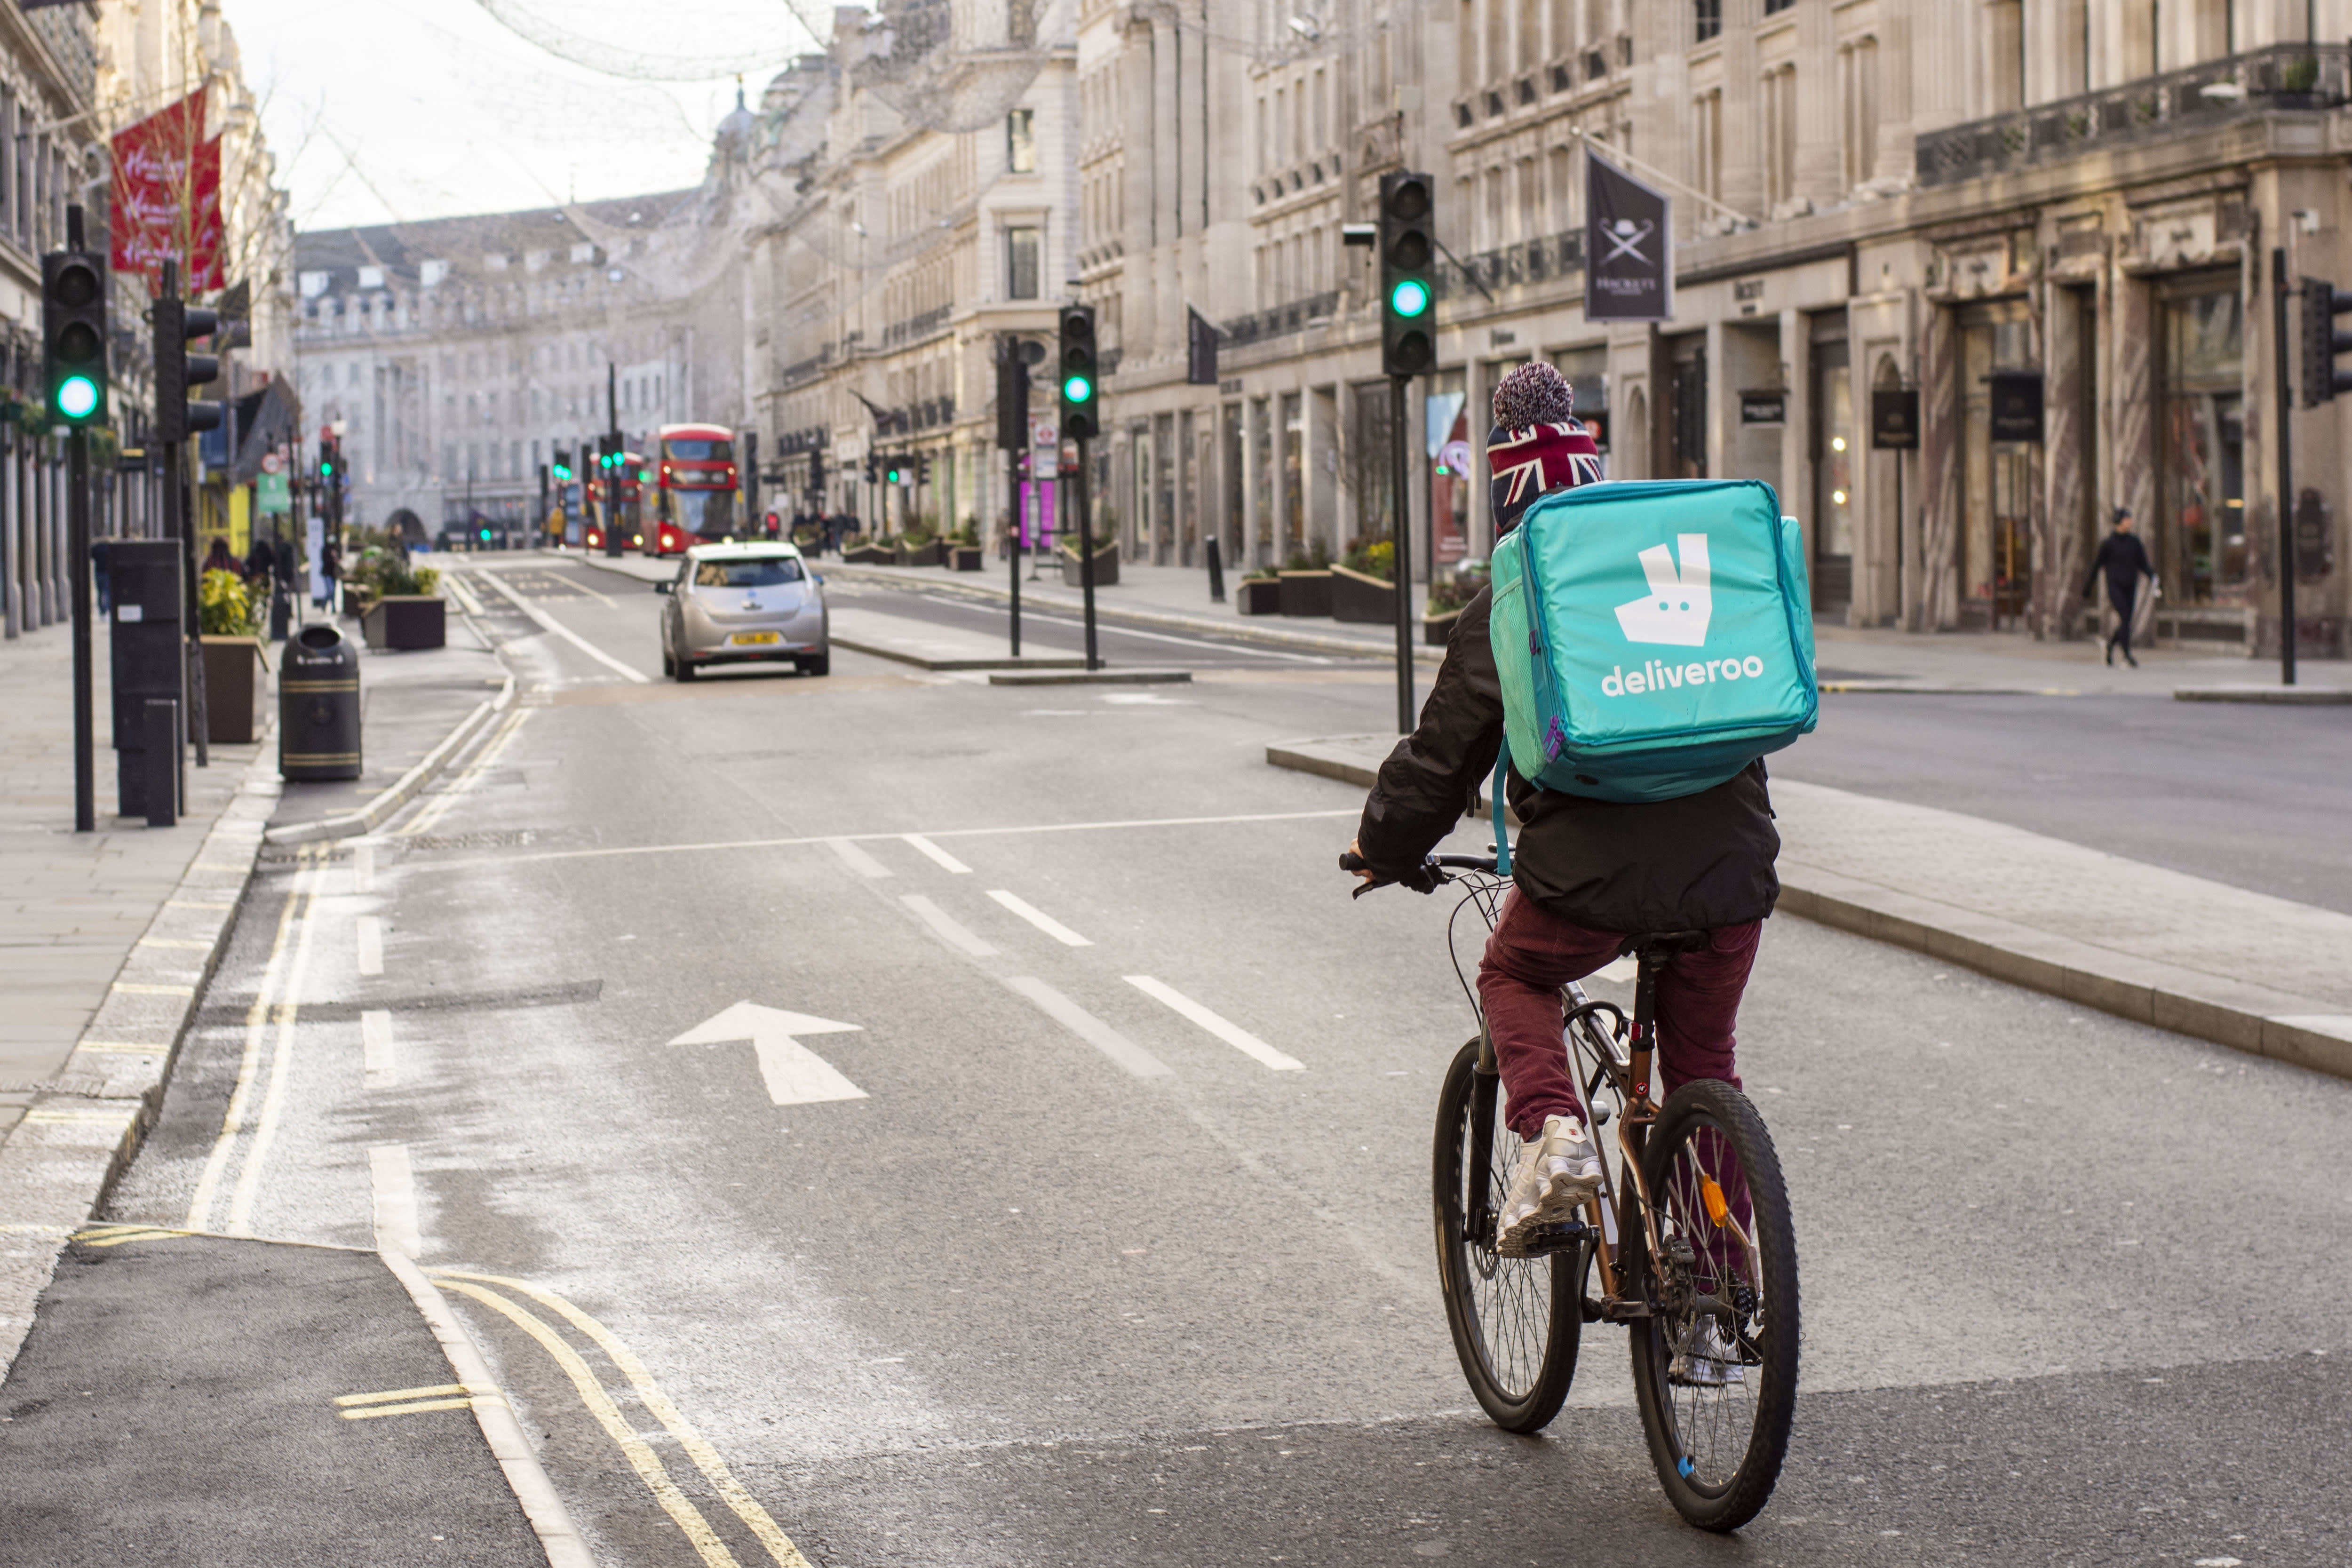 Deliveroo shares rise higher as retail investors start trading